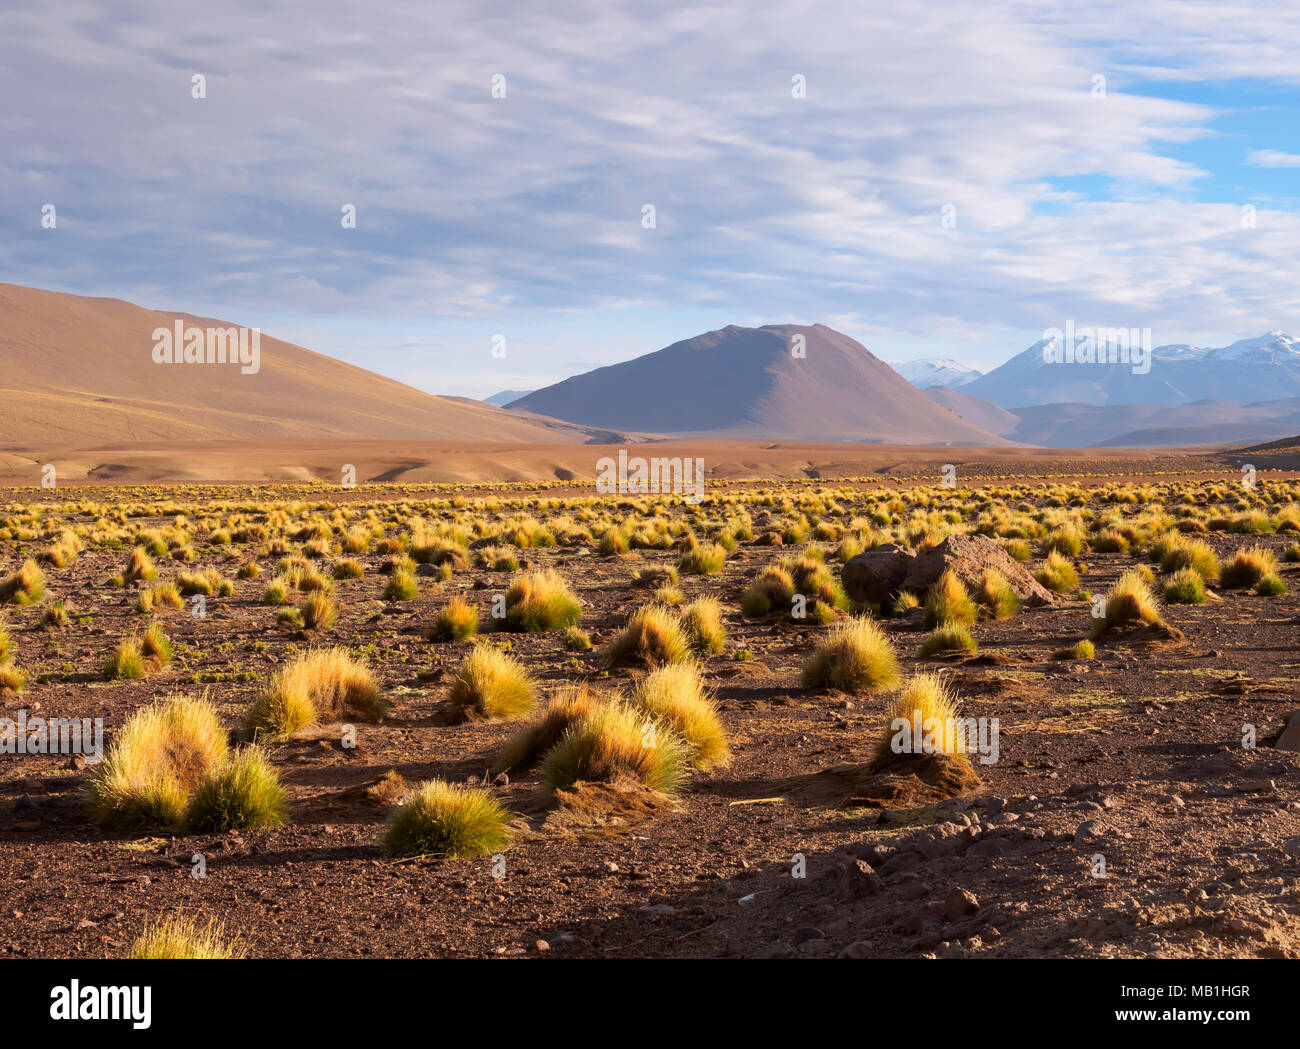 High altitude vegetation and foothills of the Andes Mountains, El Tatio, Chile Stock Photo